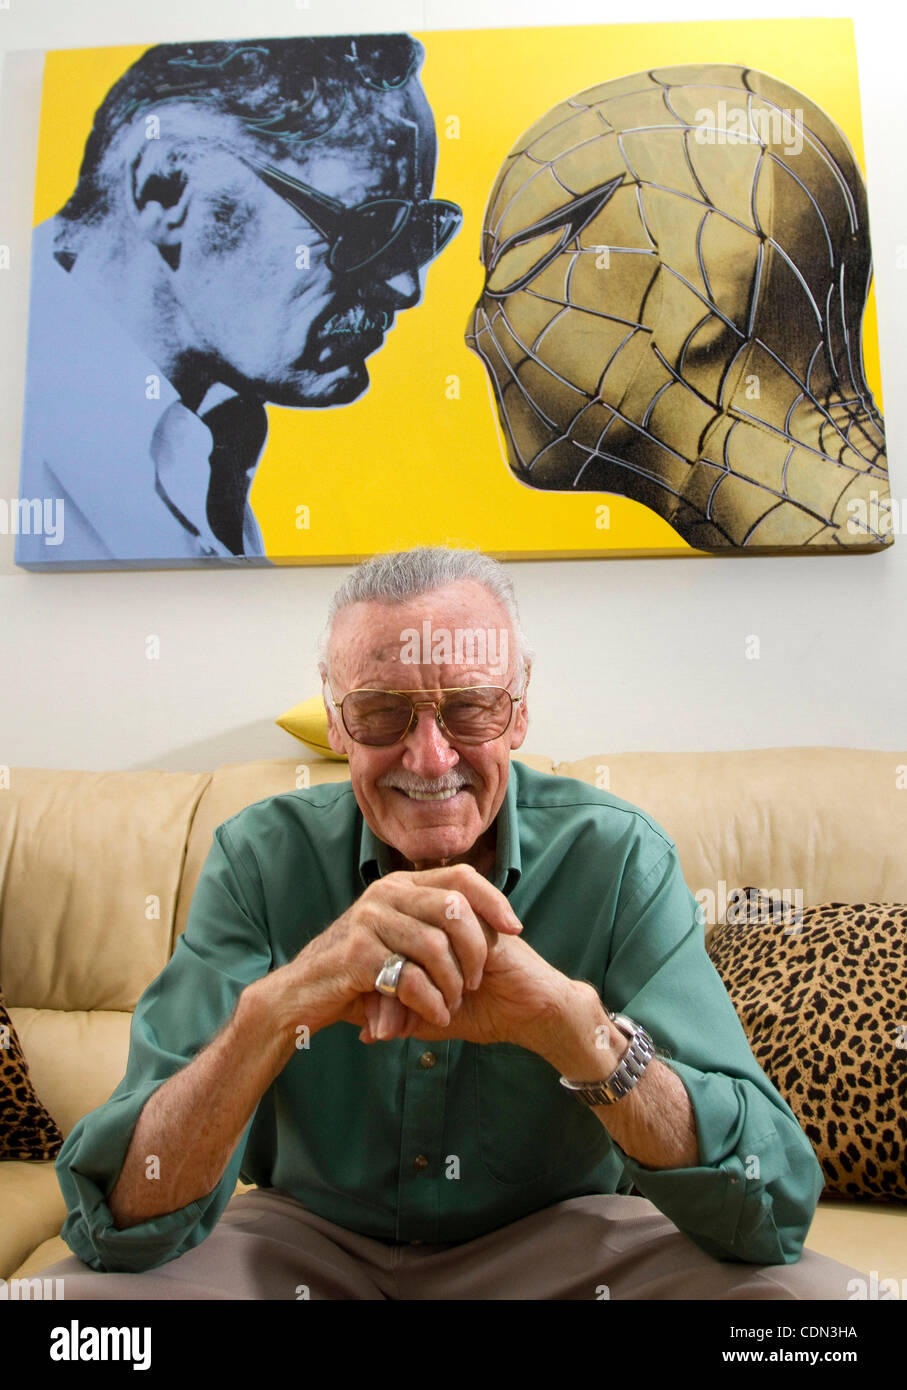 April 28, 2011 - Beverly Hills, California, USA - Stan Lee, creator of Spiderman and a comic book writer, editor, actor, producer, publisher, television personality, and the former president and chairman of Marvel Comics. (Credit Image: © Jonathan Alcorn/ZUMAPRESS.com) Stock Photo